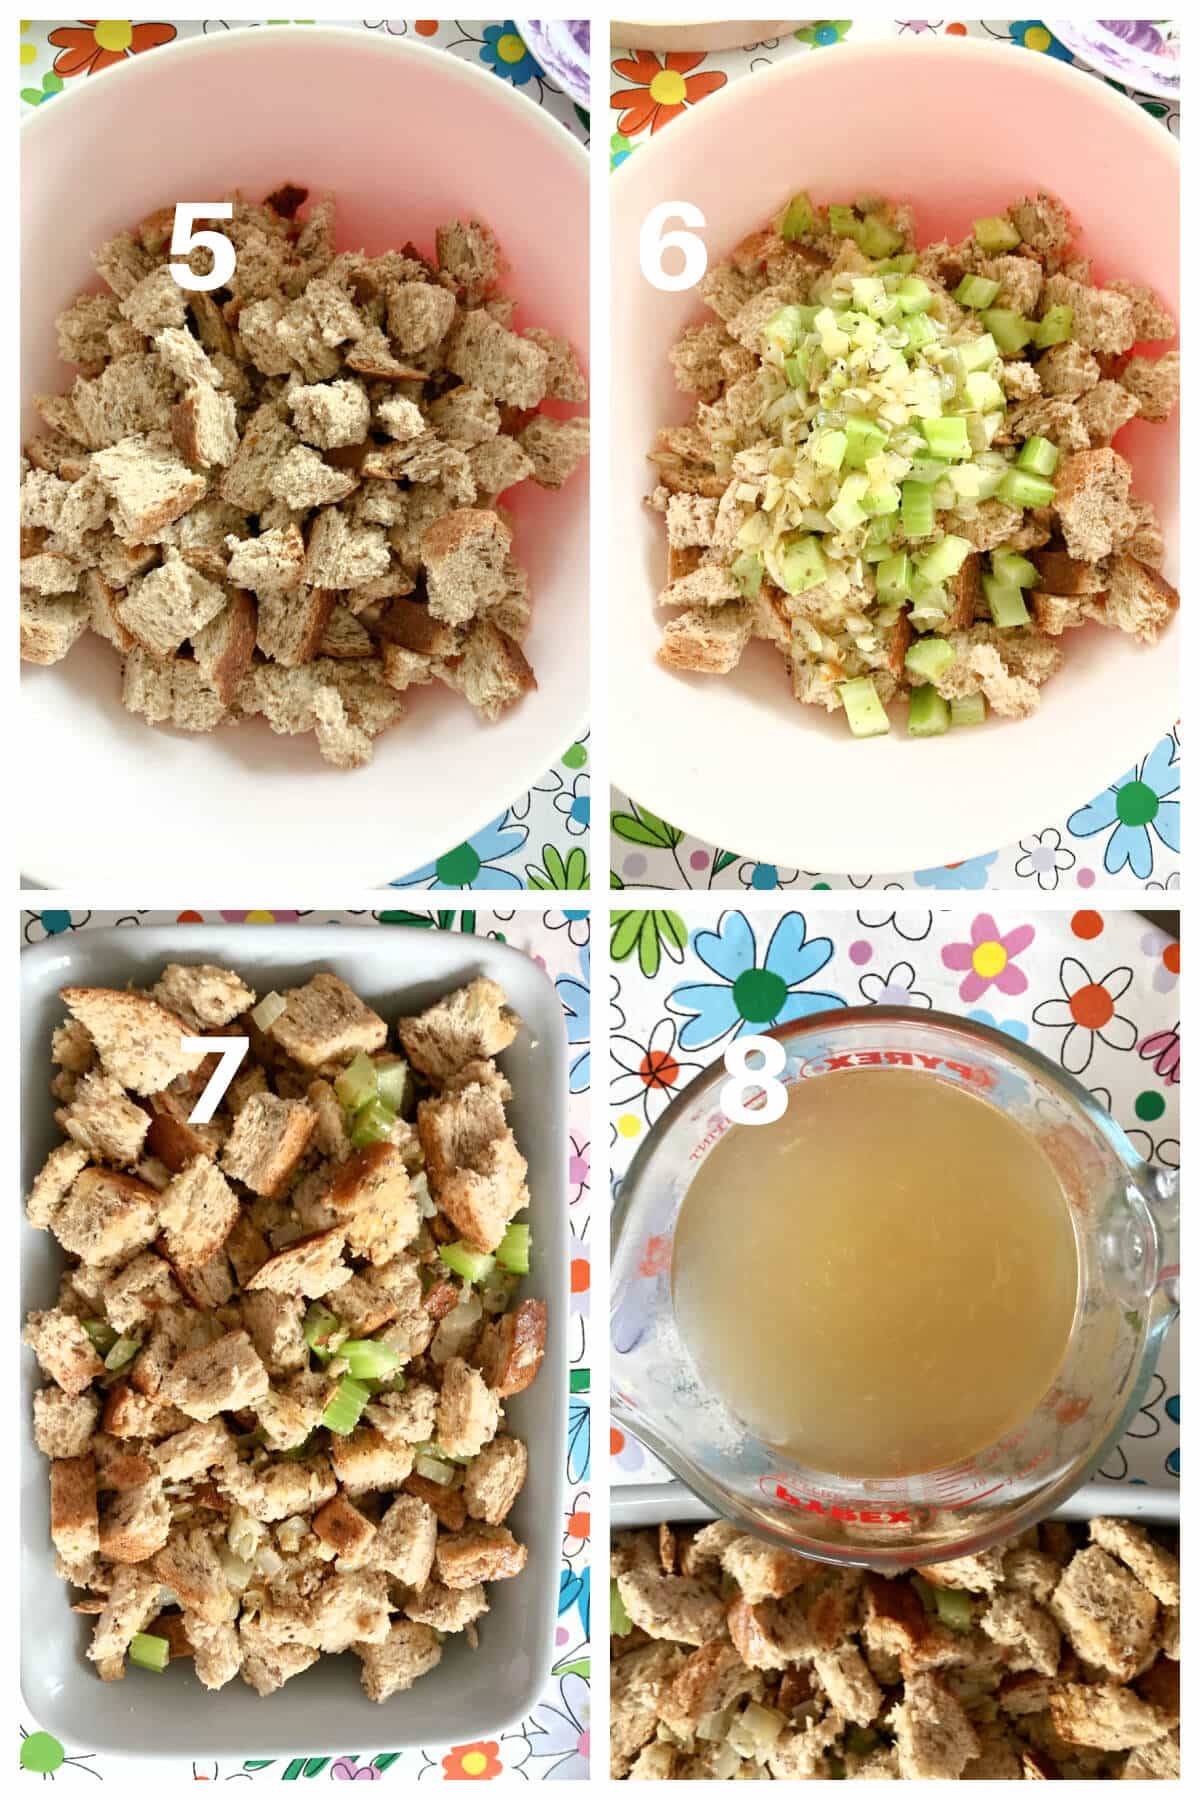 Collage of 4 photos to show how to prepare the stuffing.